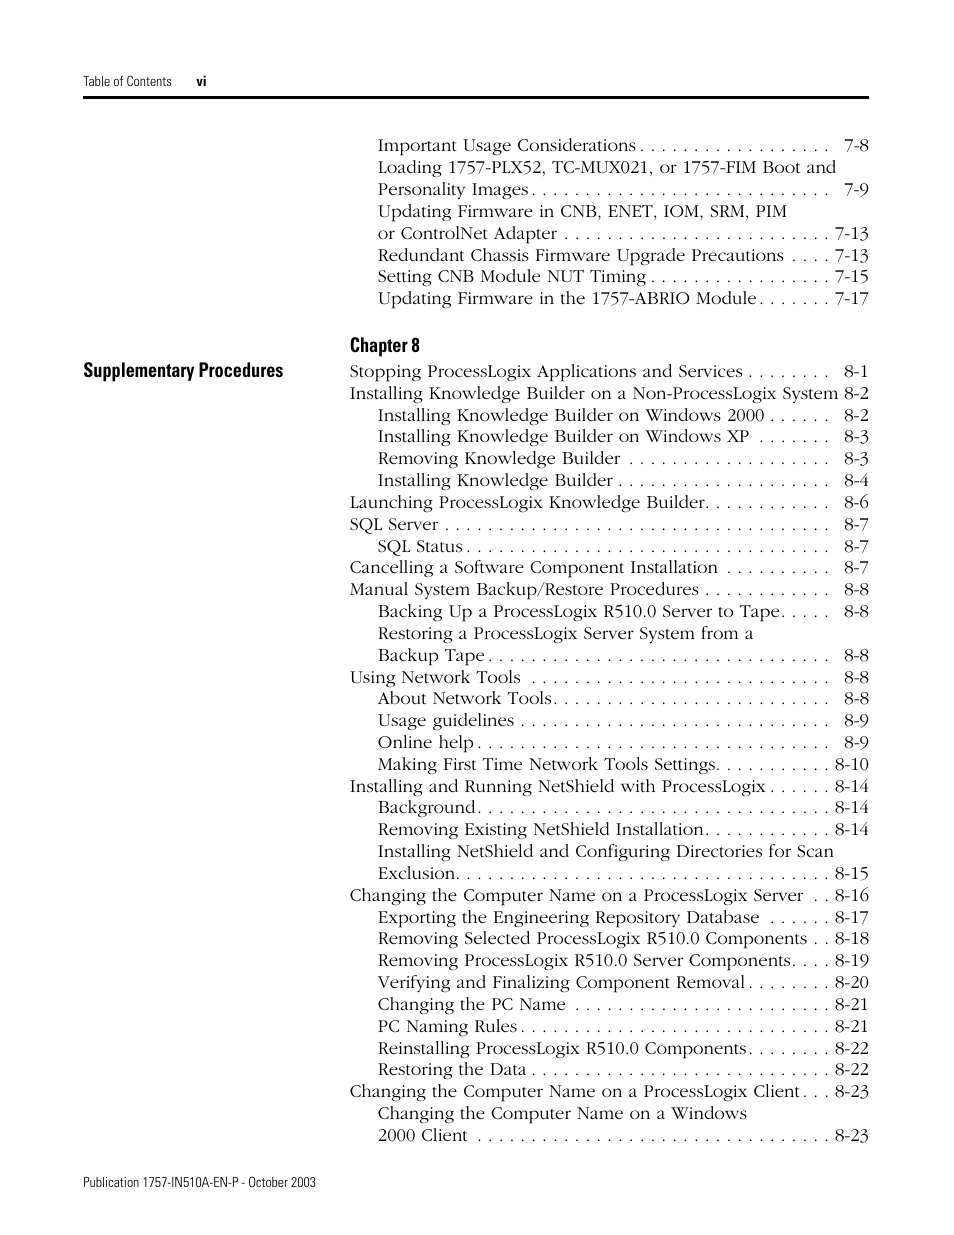 Rockwell Automation 1757-SWKIT5100 ProcessLogix R510.0 Installation and Upgrade Guide User Manual | Page 8 / 271